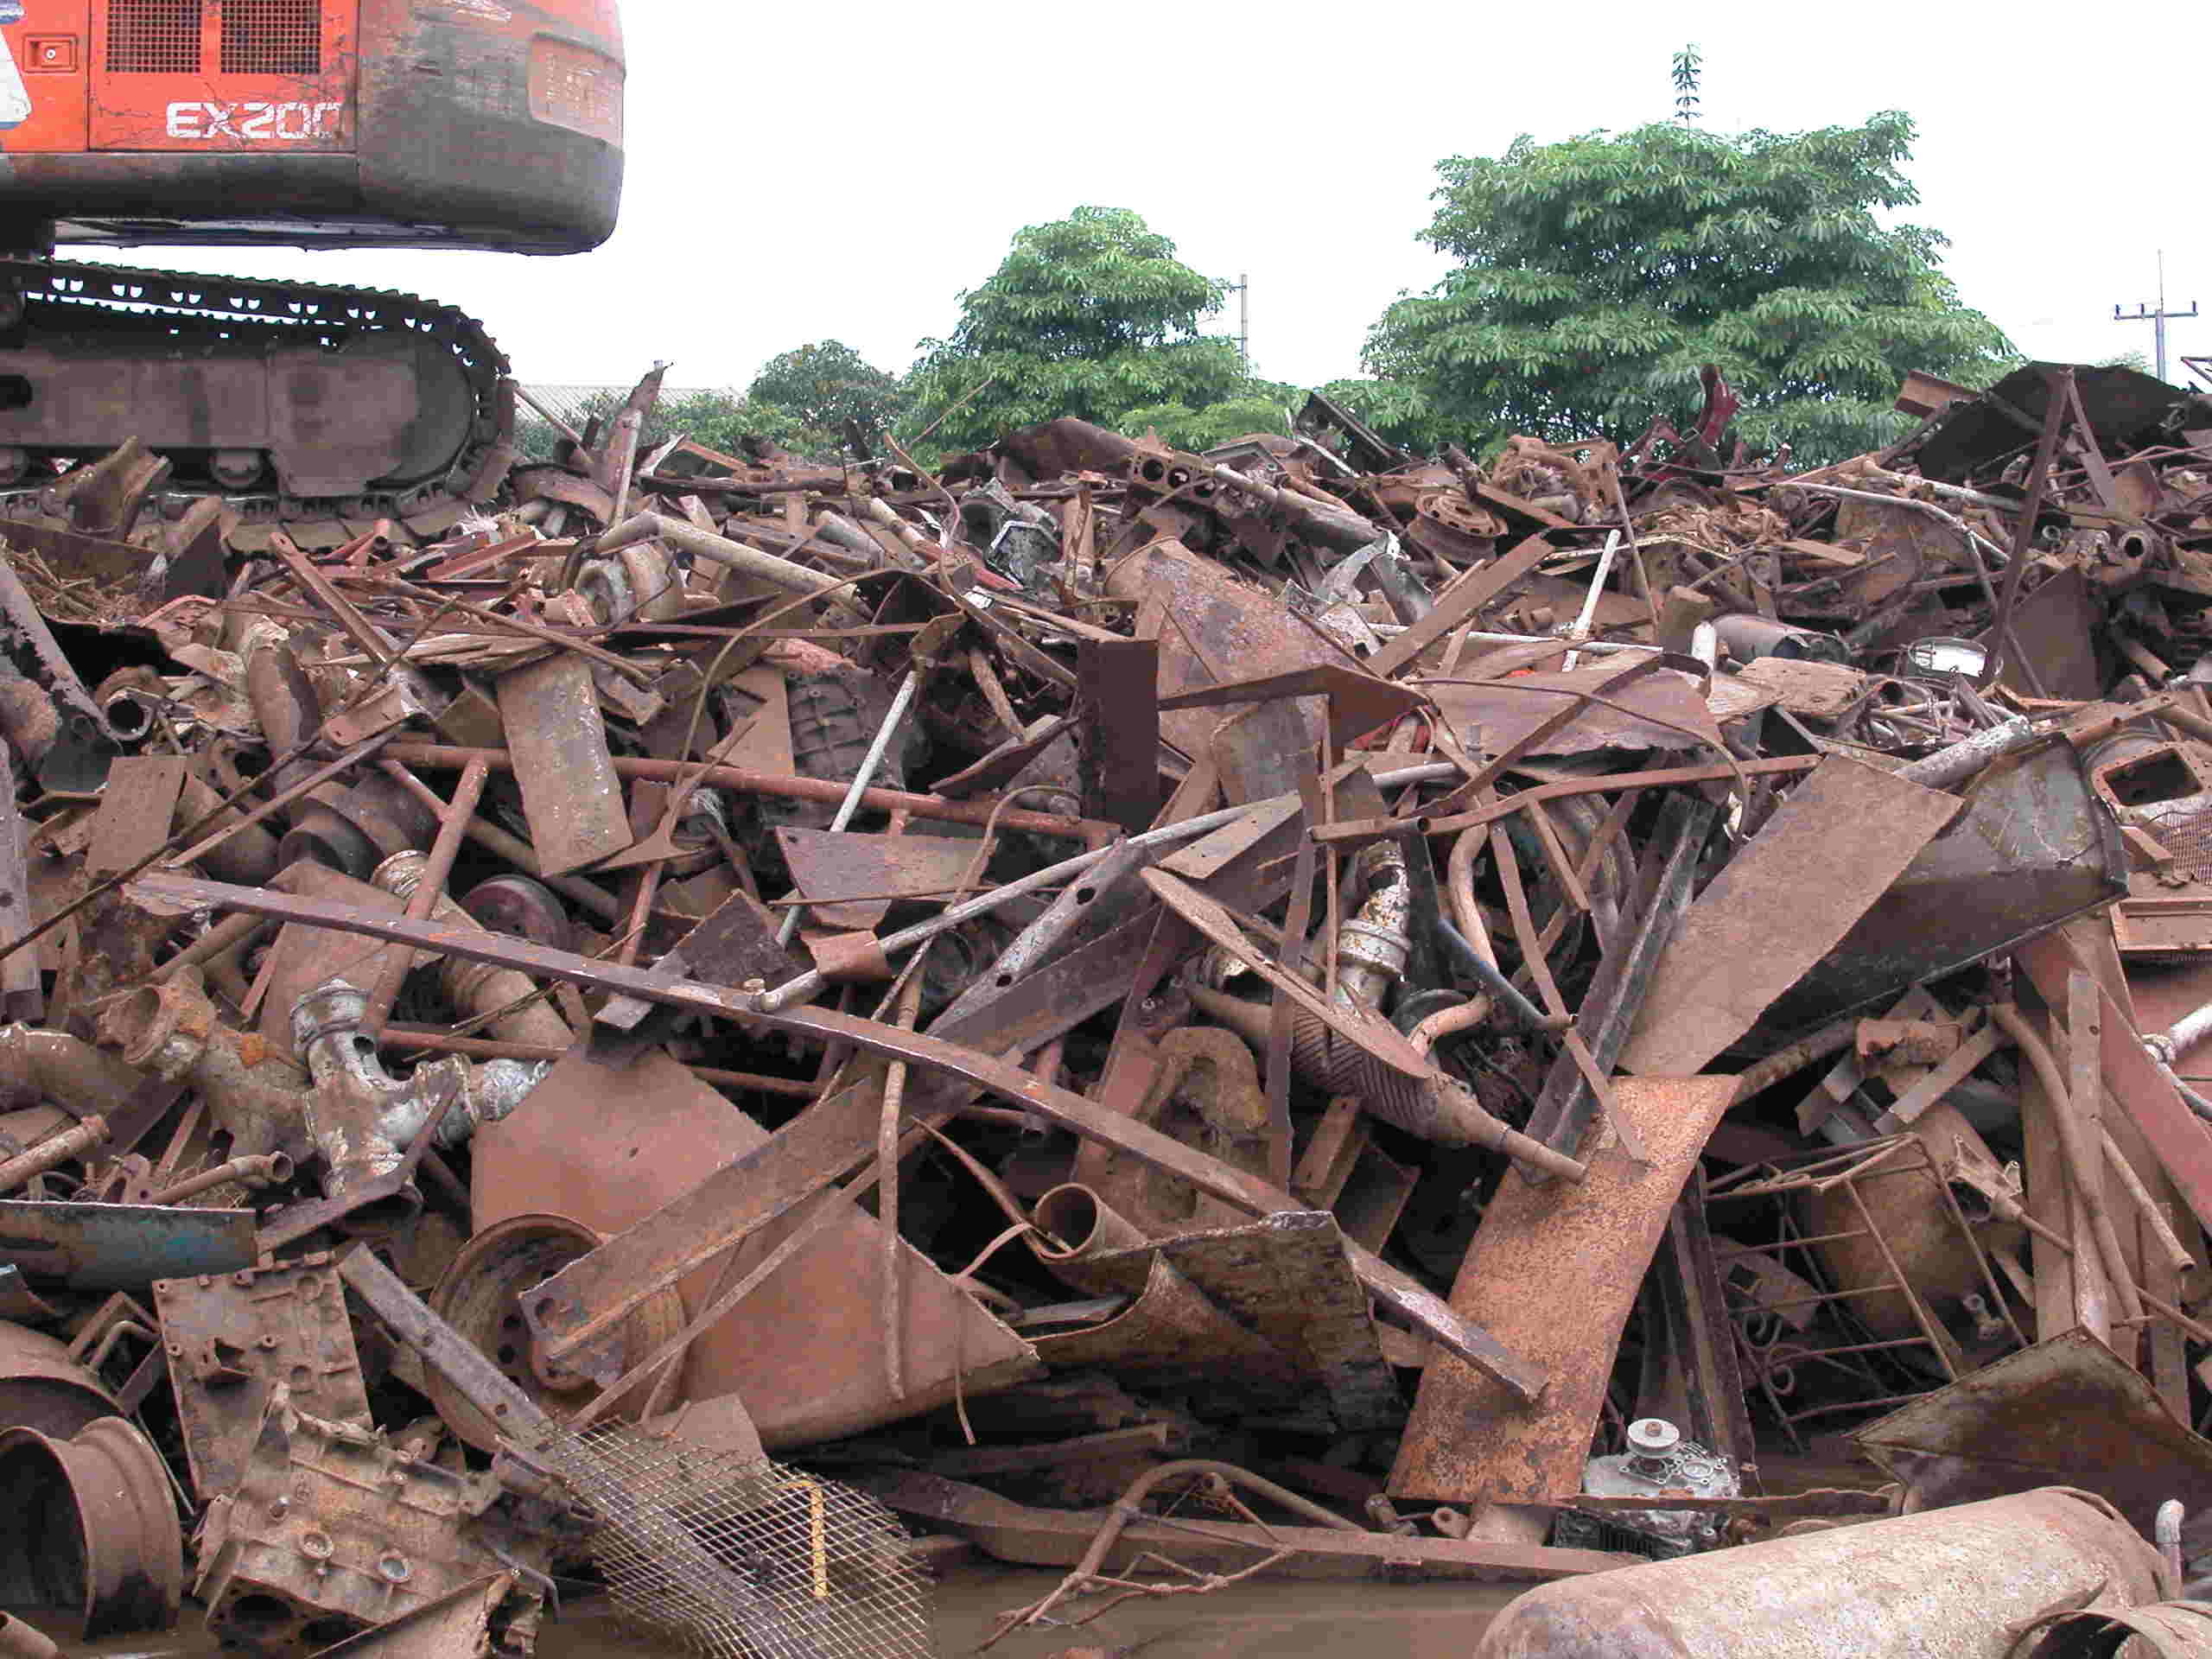 Image Product of No. 1 Heavy Melting Steel Scrap